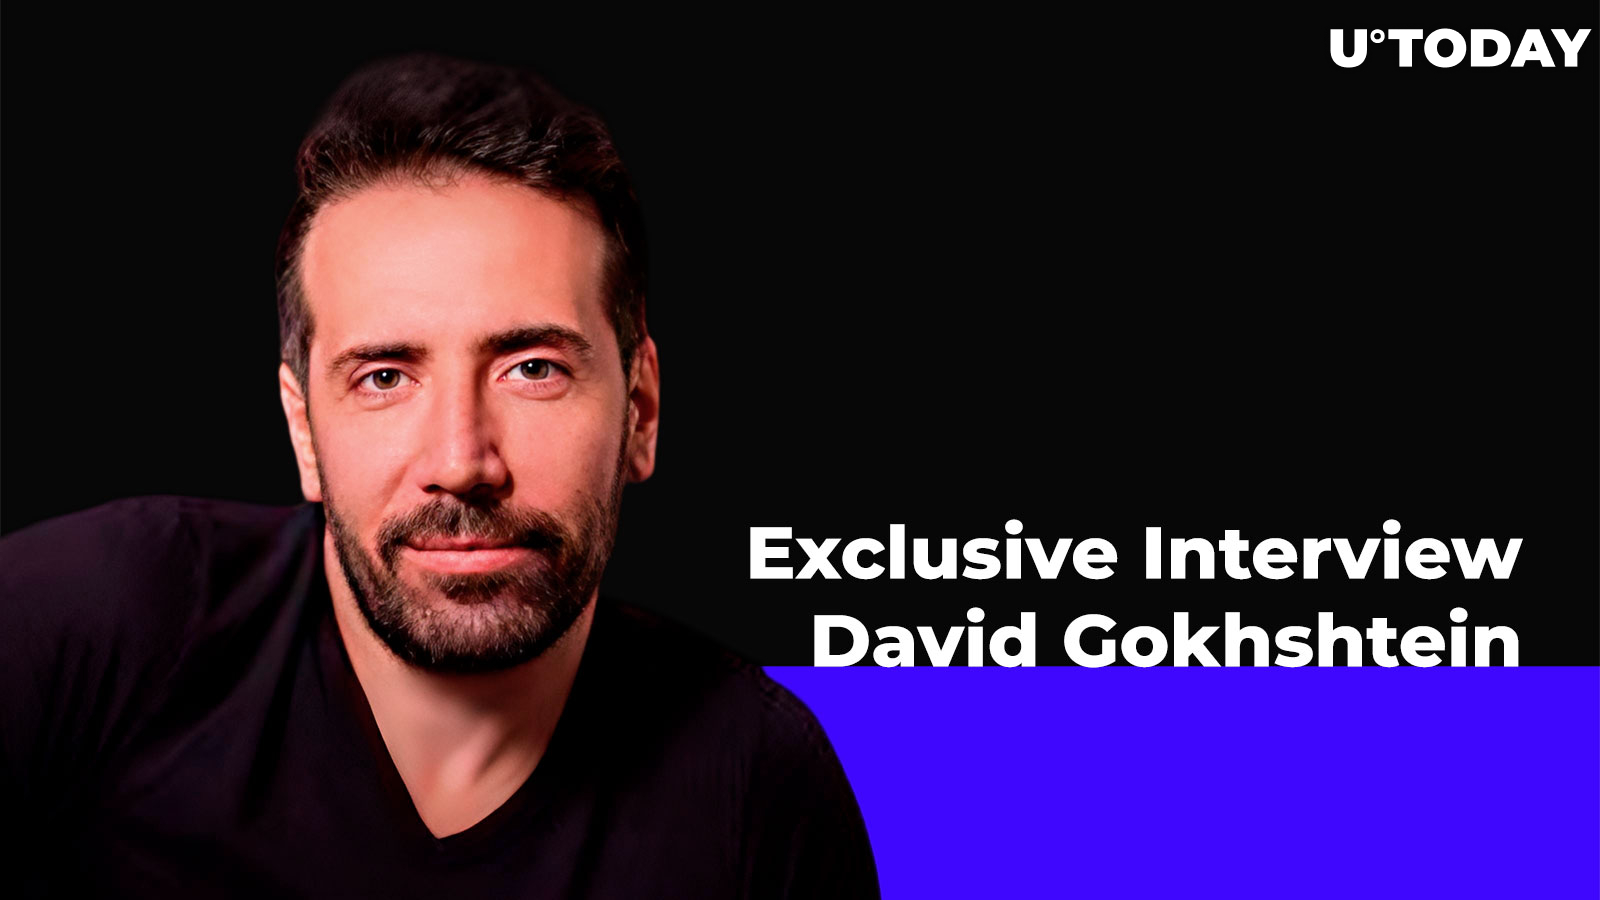 XRP, SHIB, Ethereum, LUNC…David Gokhshtein Speaks About Top Cryptos in This Exclusive Interview